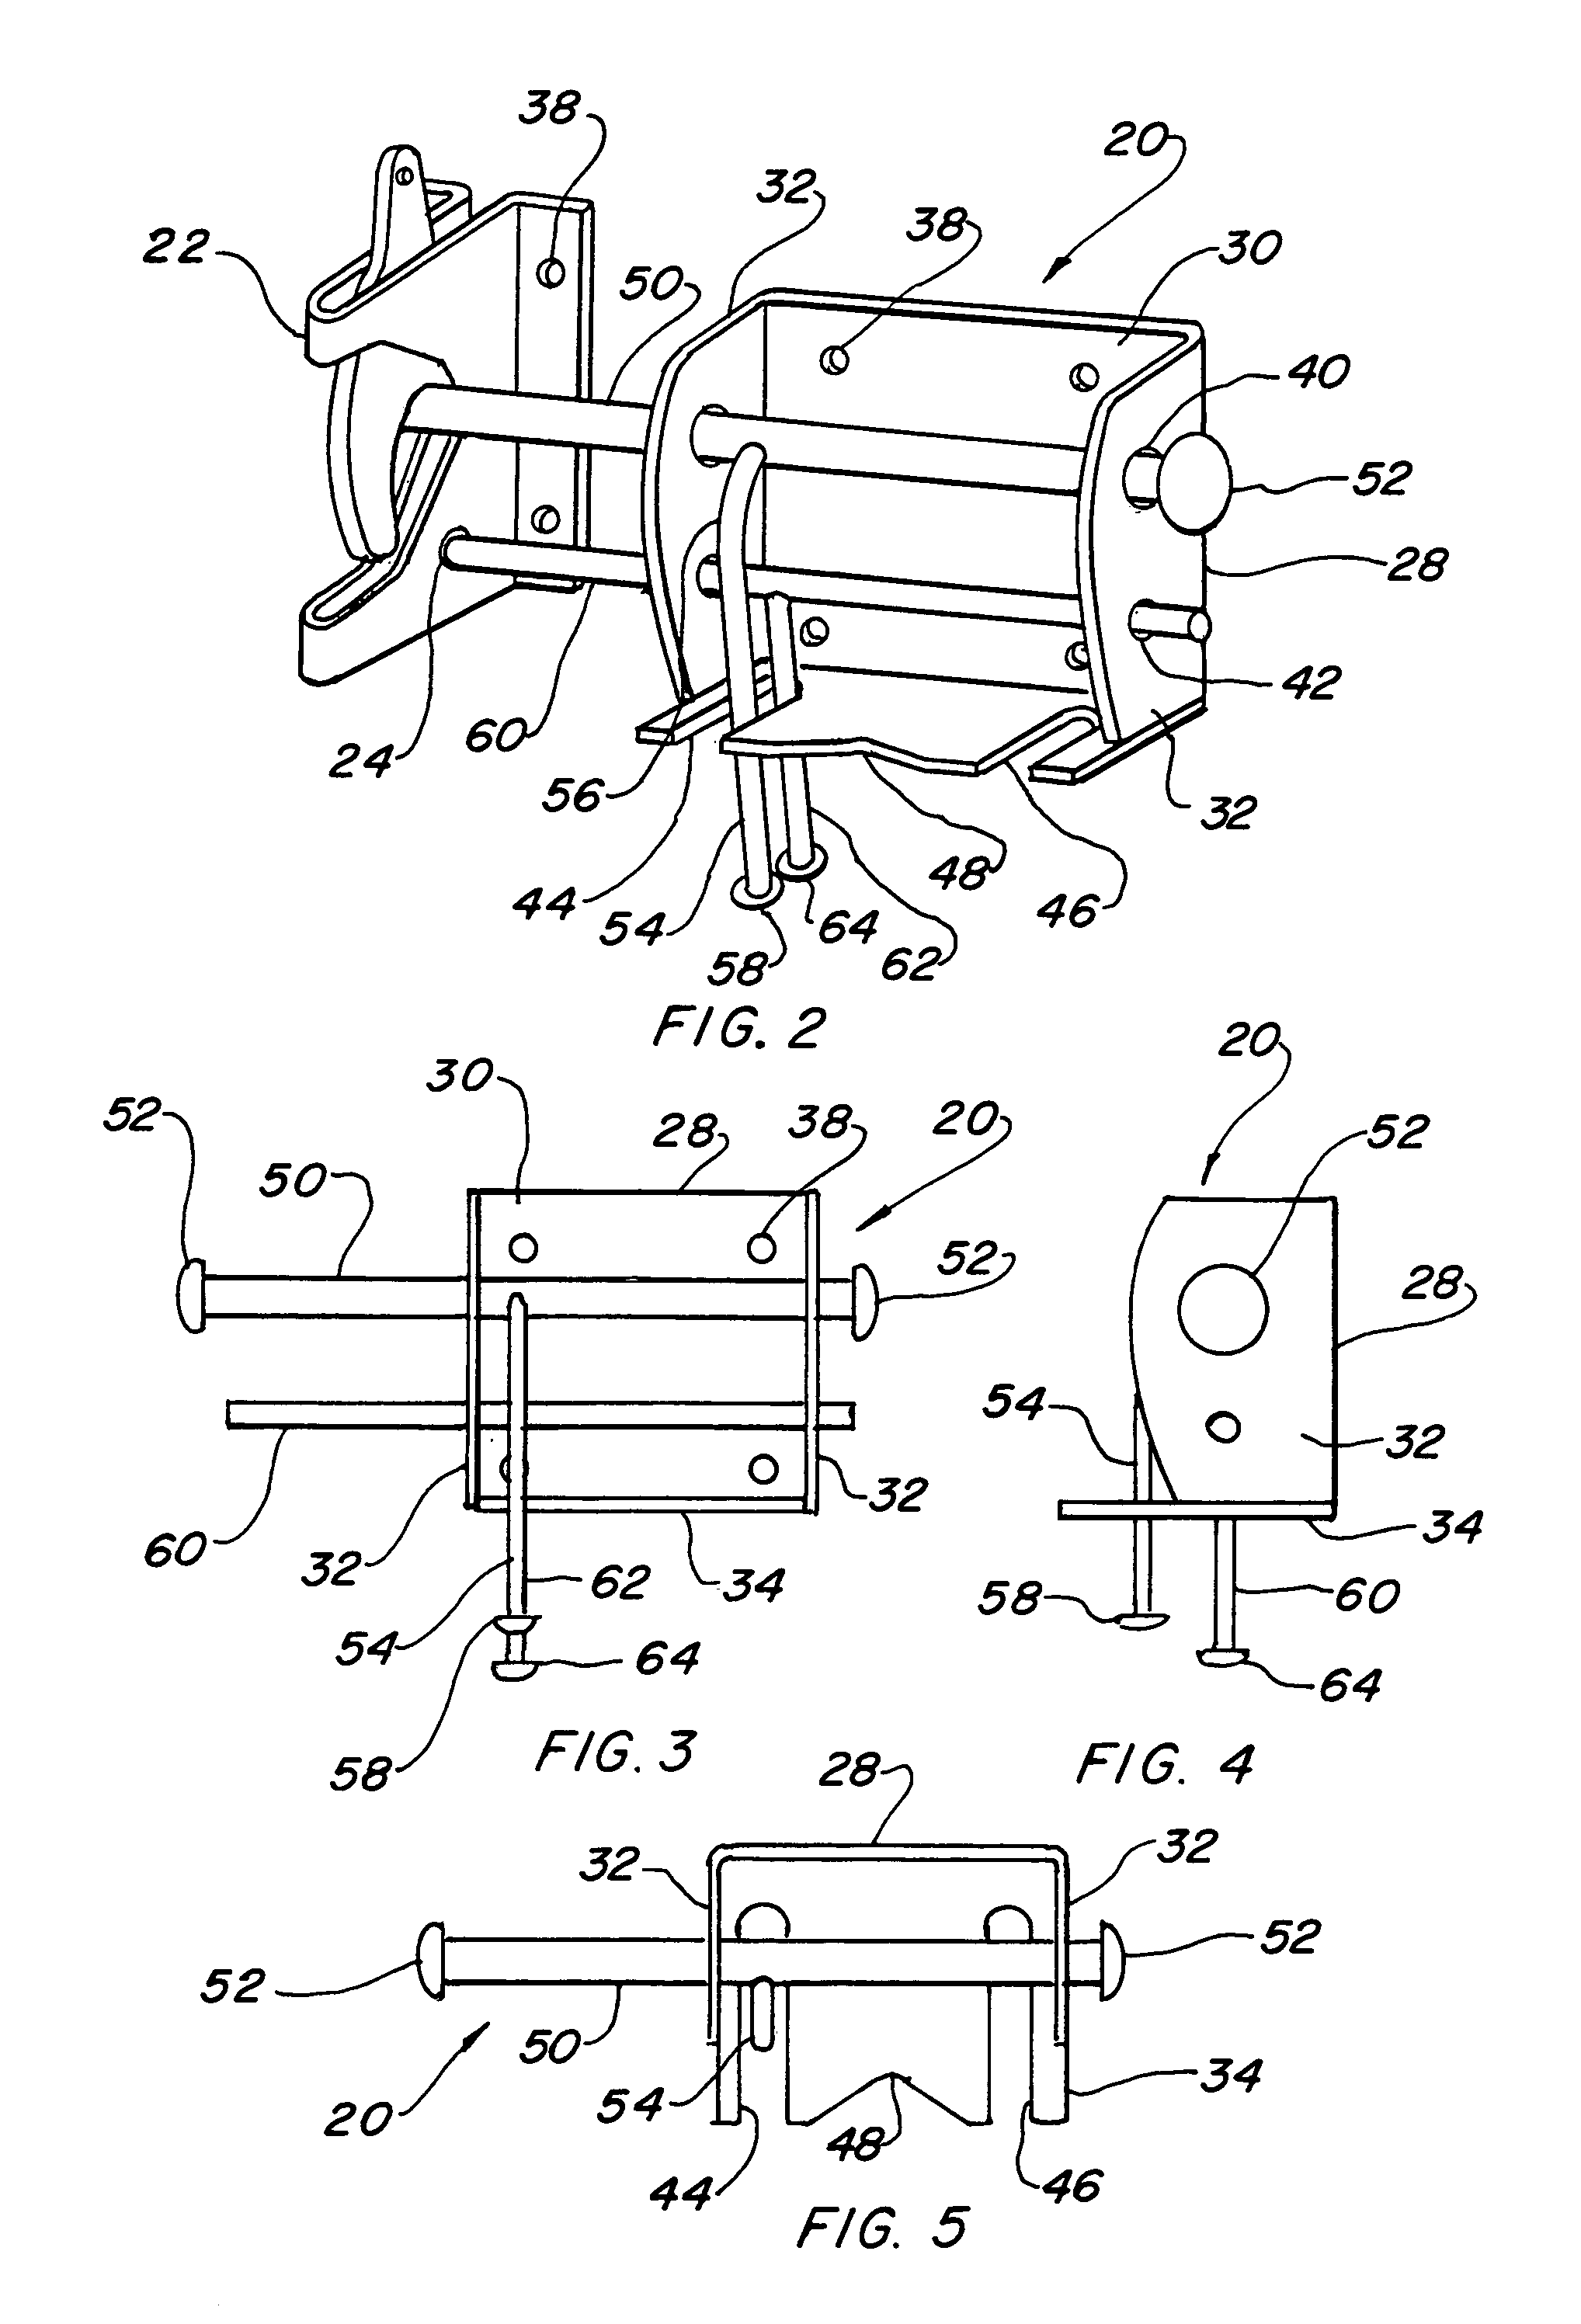 Four position gate latch assembly